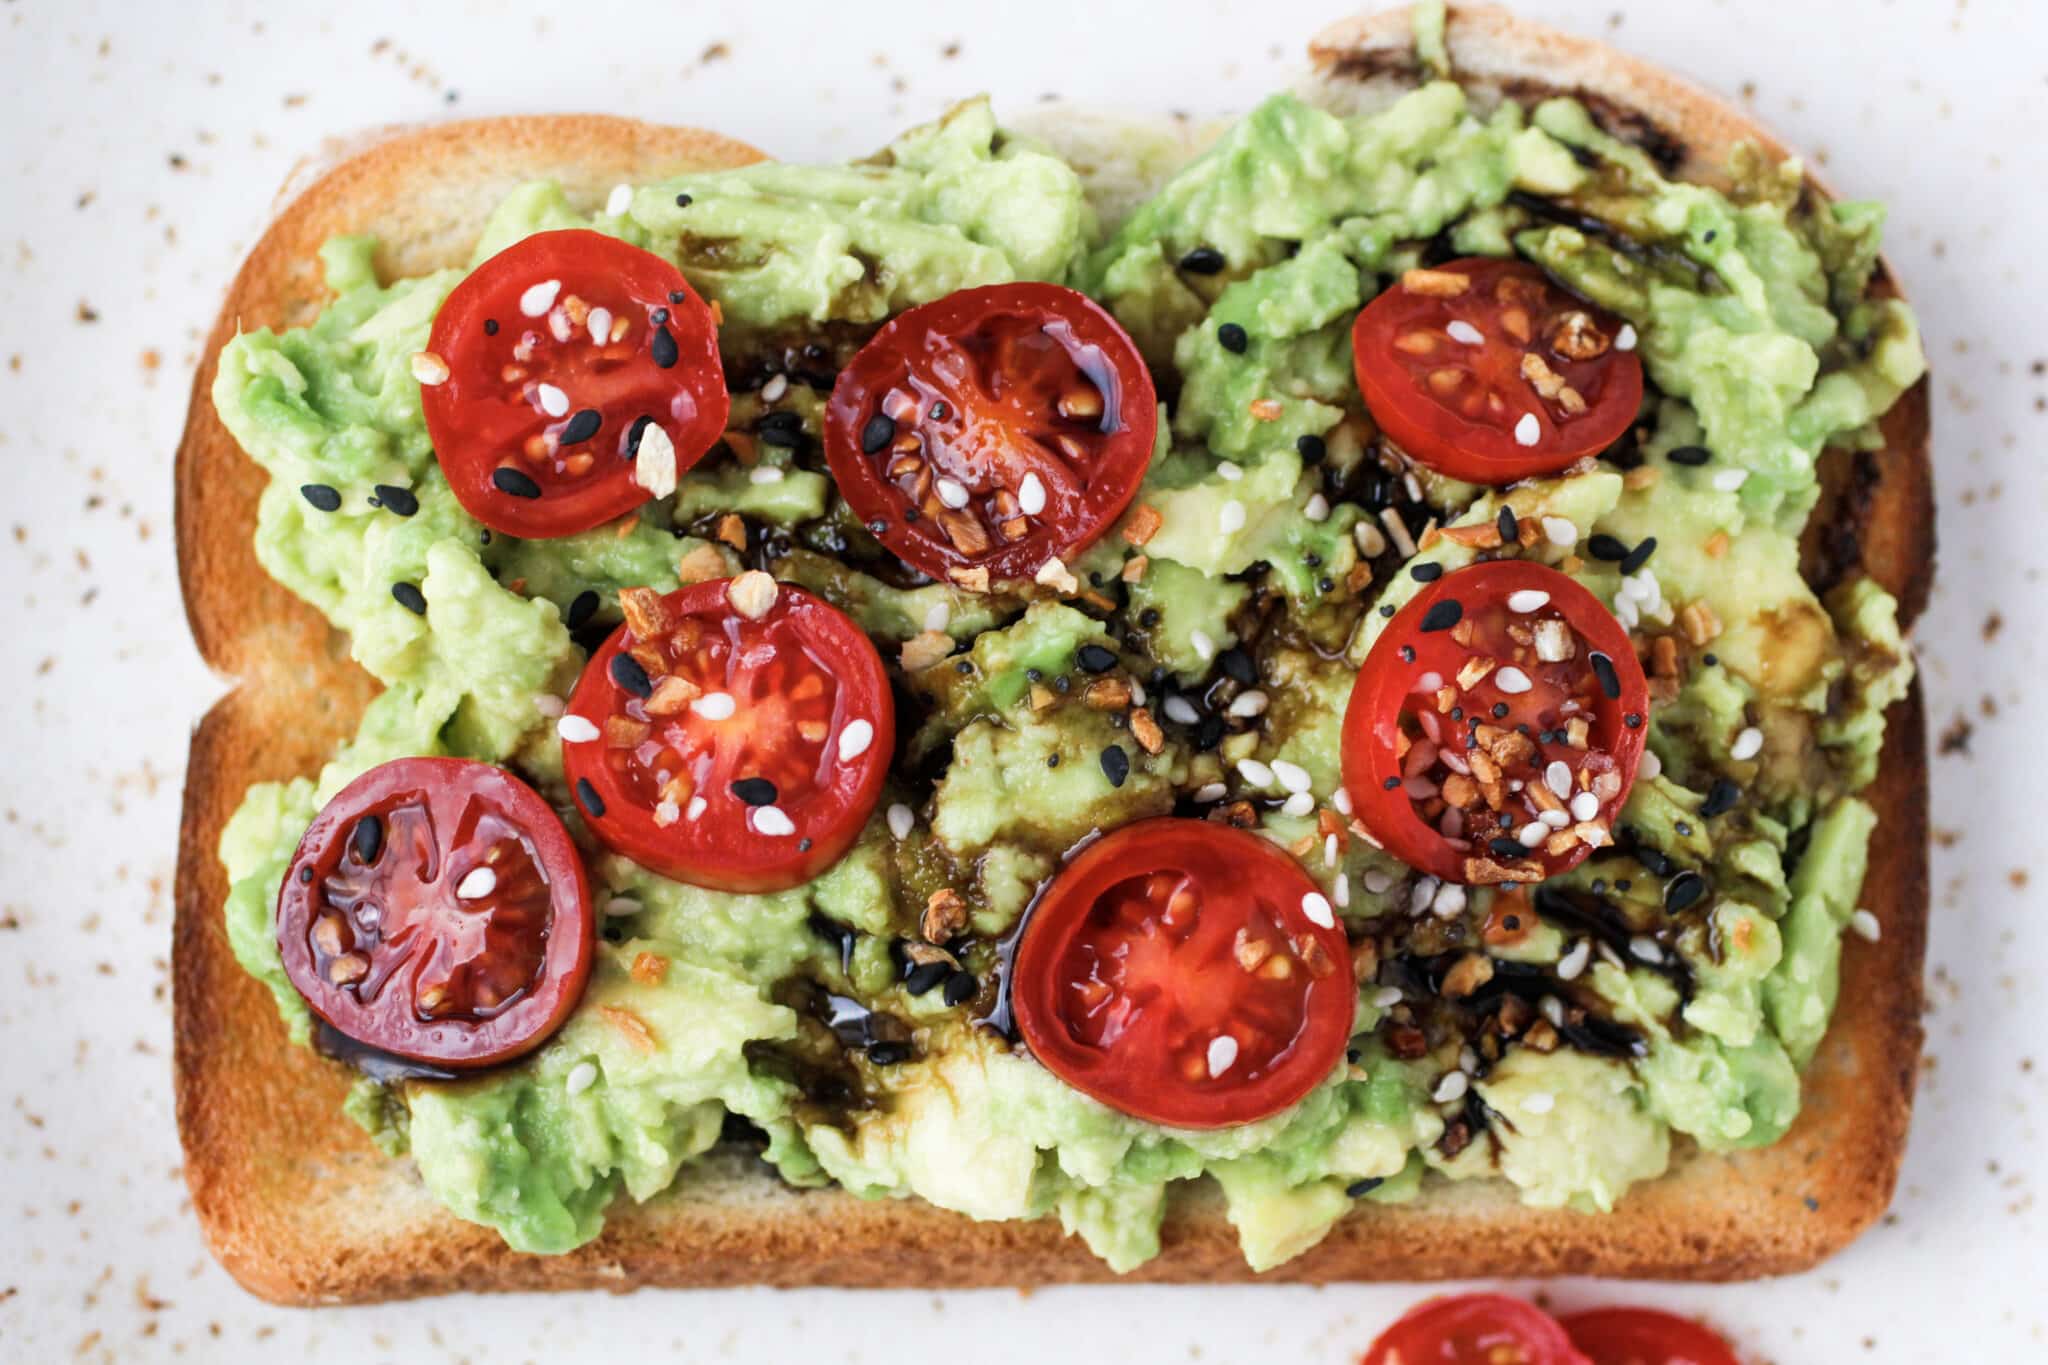 Avocado Toast with Balsamic Glaze - Cooking Up Memories